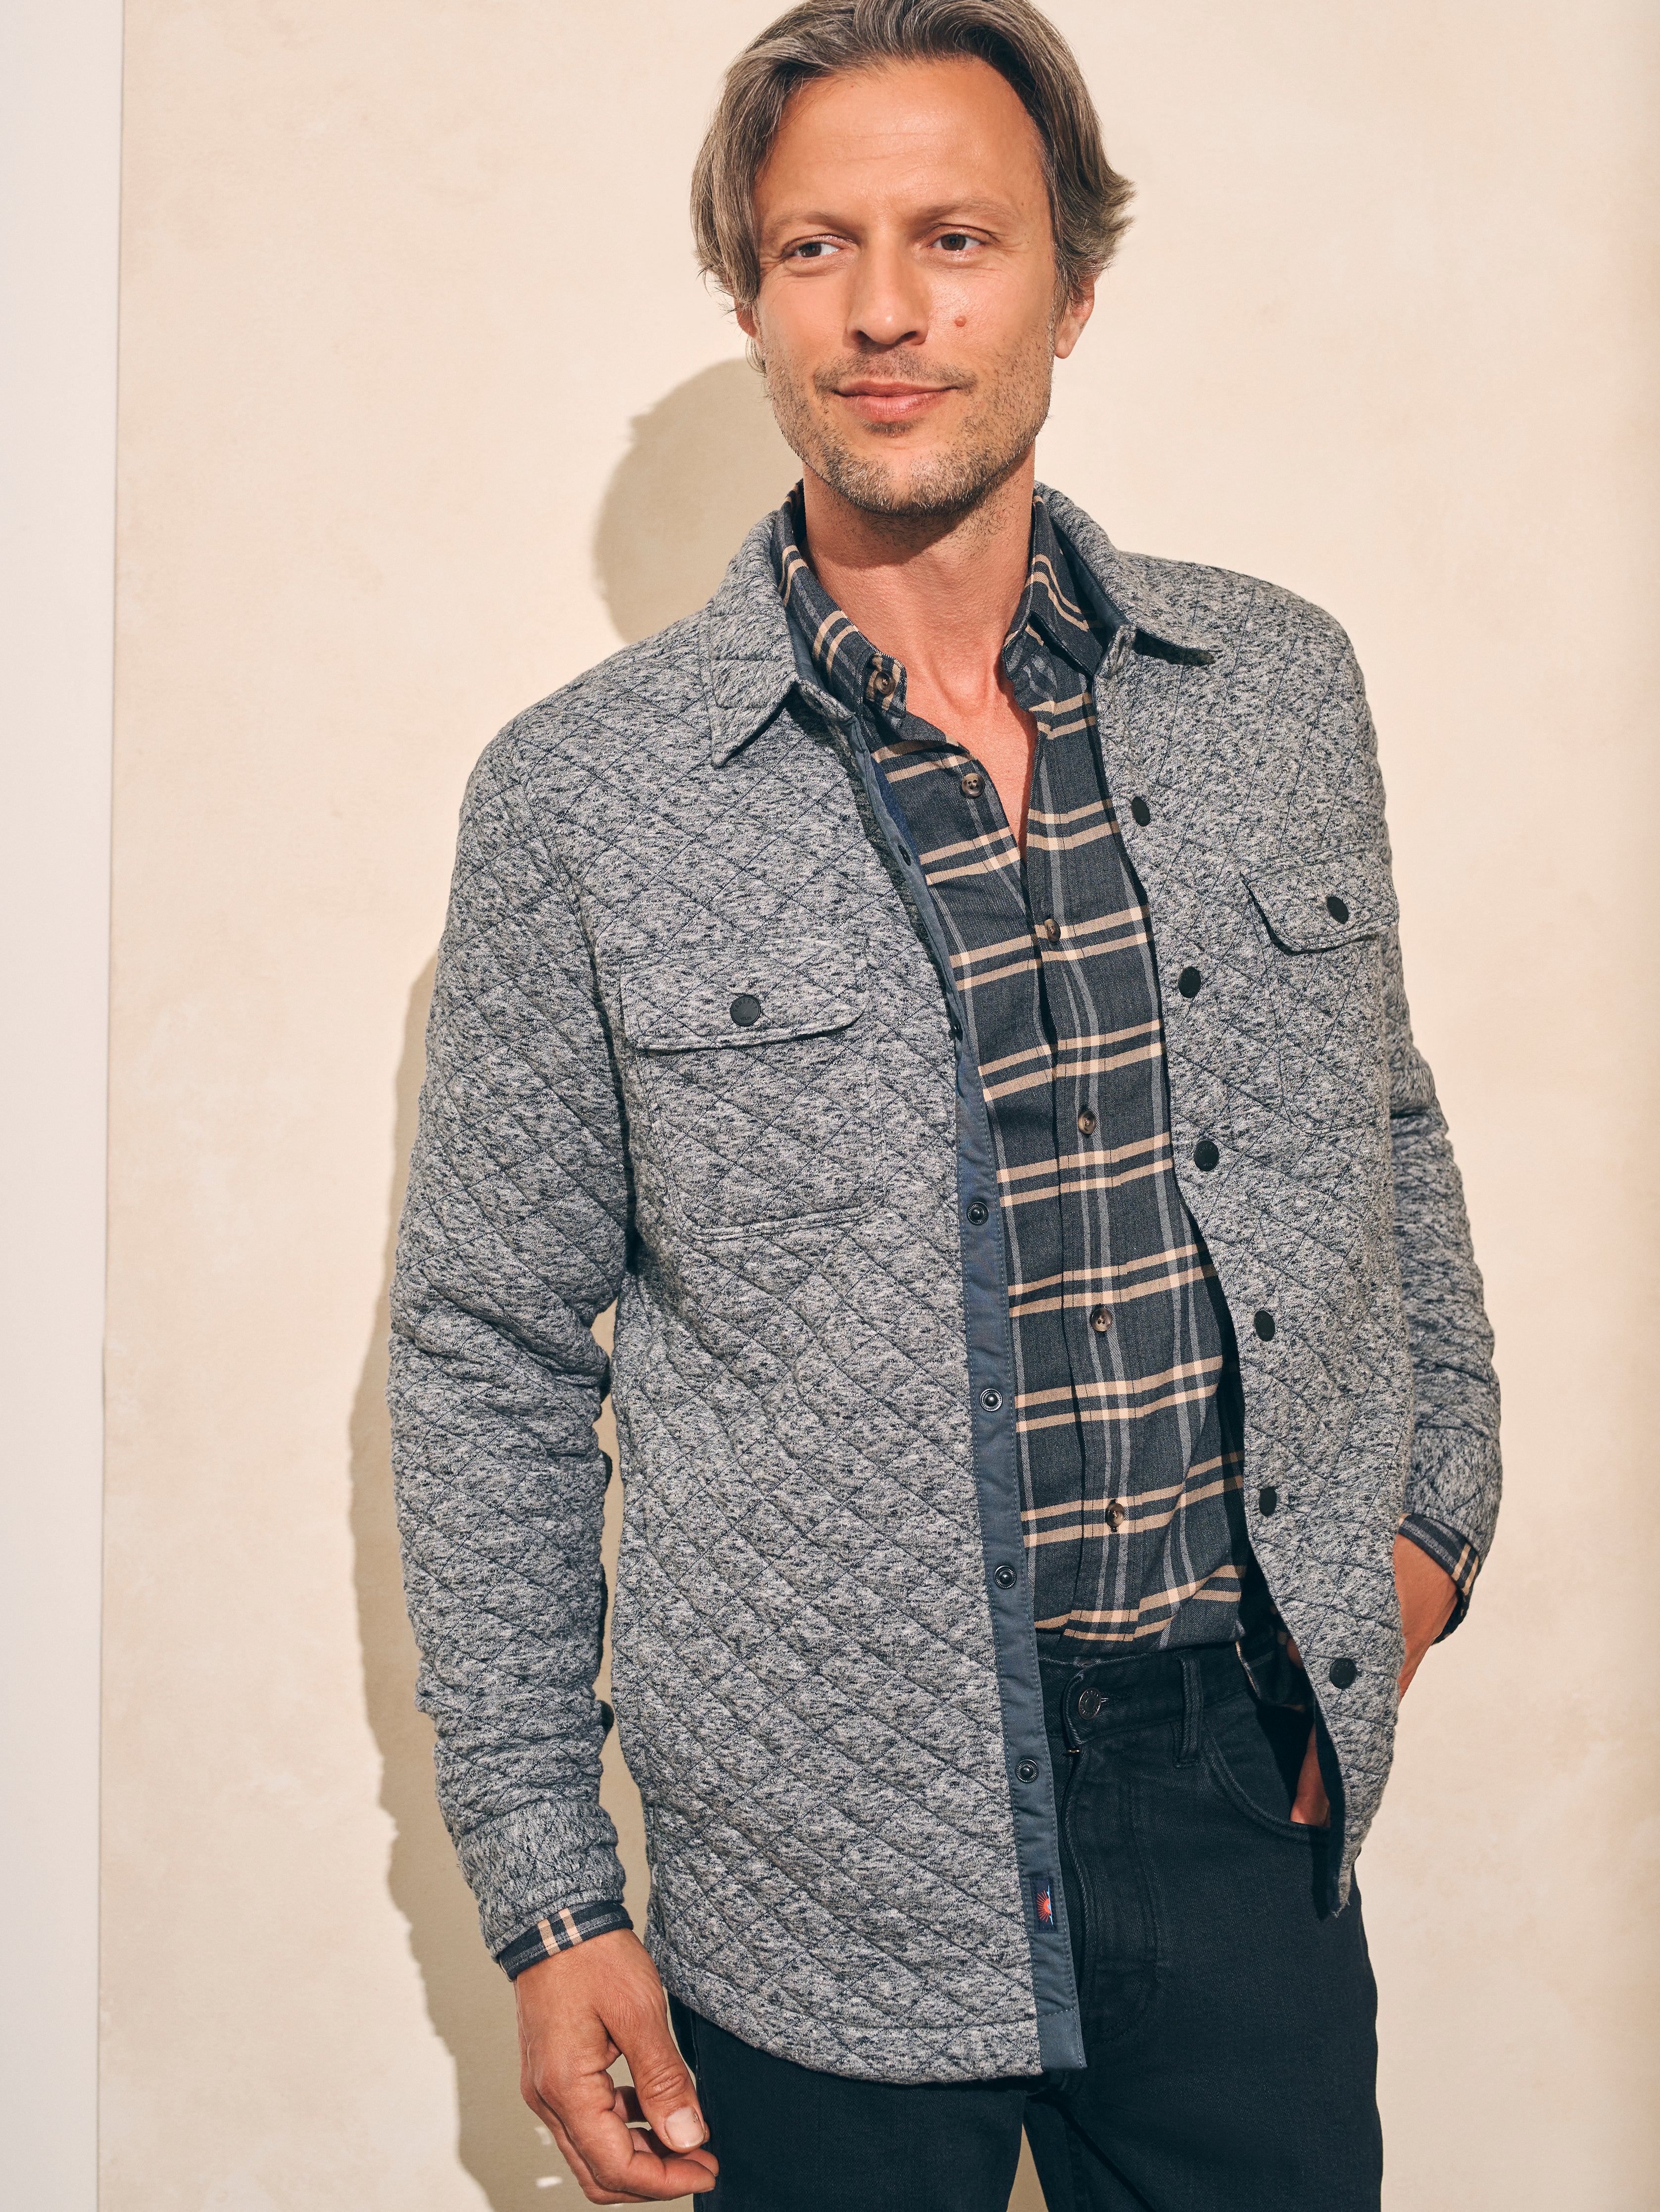 Epic Quilted Fleece CPO (Tall) - Carbon Melange | Faherty Brand